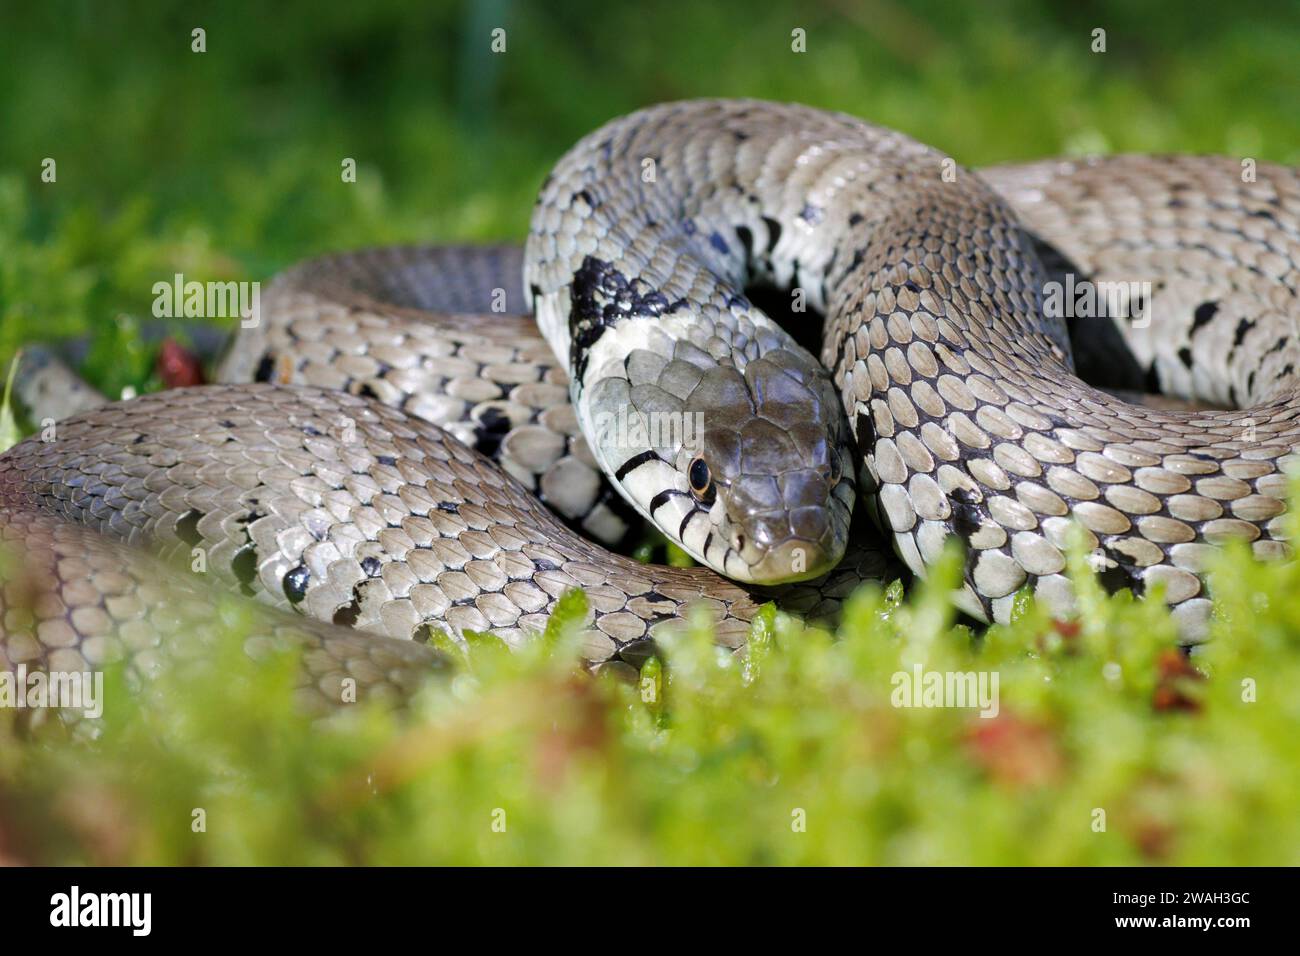 barred grass snake (Natrix natrix helvetica, Natrix helvetica), lying coiled up in moss, looking toward camera, France, Le Mans Stock Photo